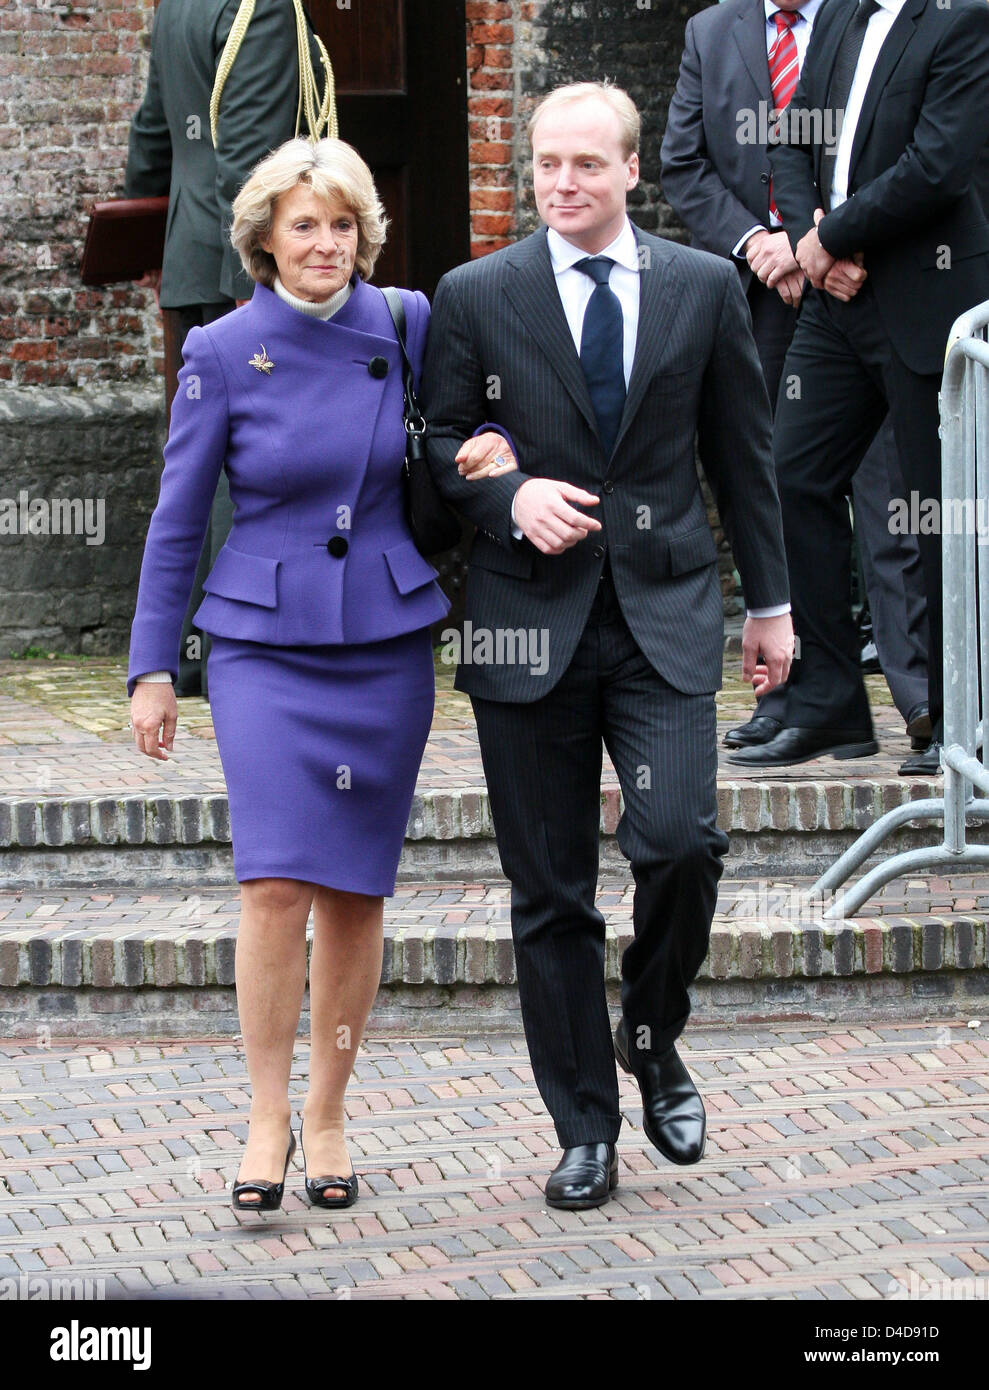 Princess Irene of the Netherlands (L) and her son Prince Carlos arrive for a church service to commemorate Dutch World War II hero Erik Hazelhoff Roelfzema in Wassenaar, the Netherlands, 03 April 2008. Photo: Albert Nieboer (NETHERLANDS OUT) Stock Photo